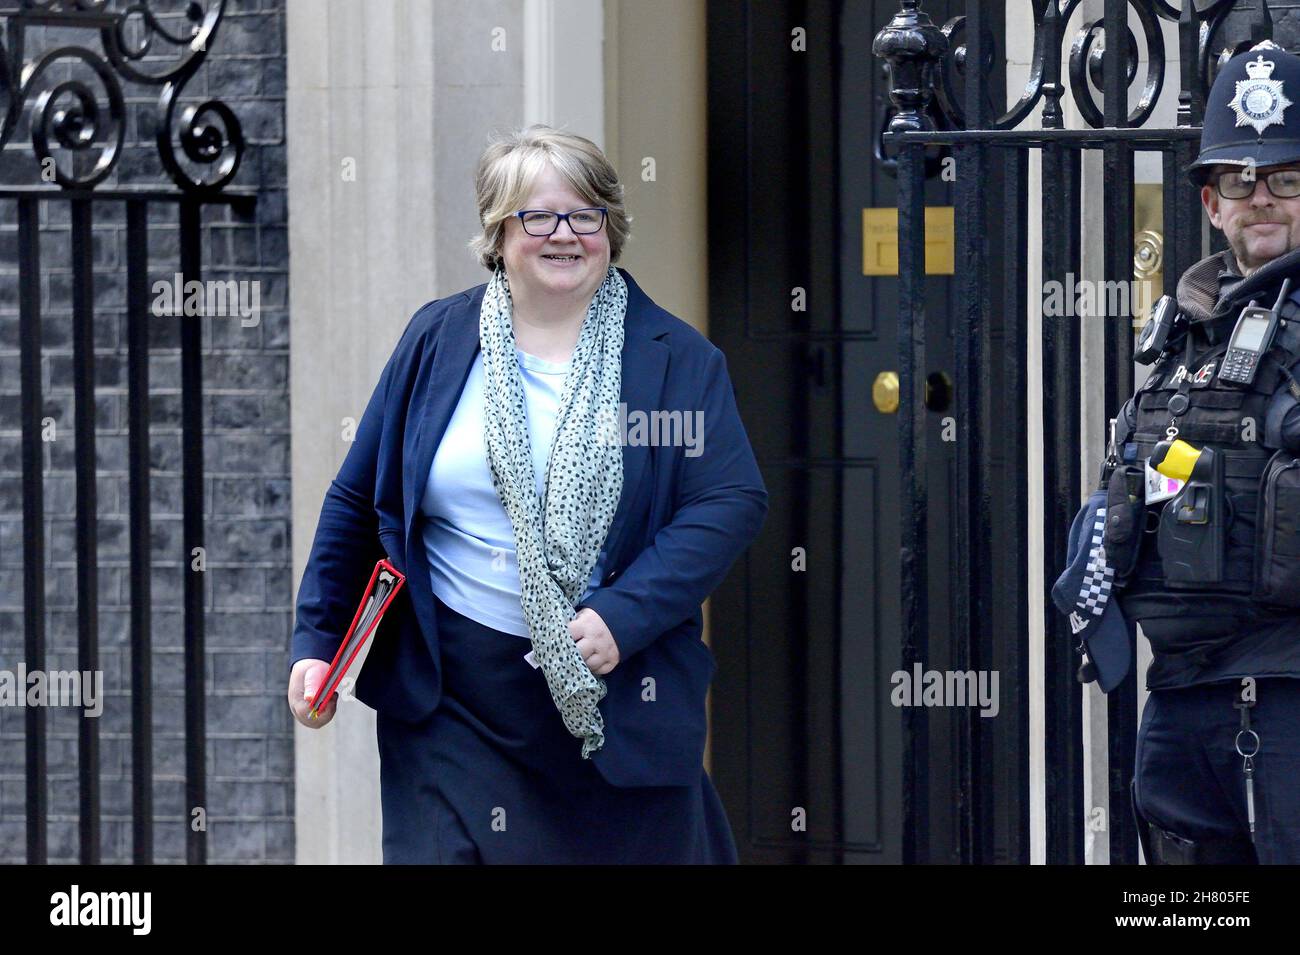 Thérèse Coffey MP - Secretary of State for Work and Pensions - leaving 10 Downing Street, November 2021 Stock Photo